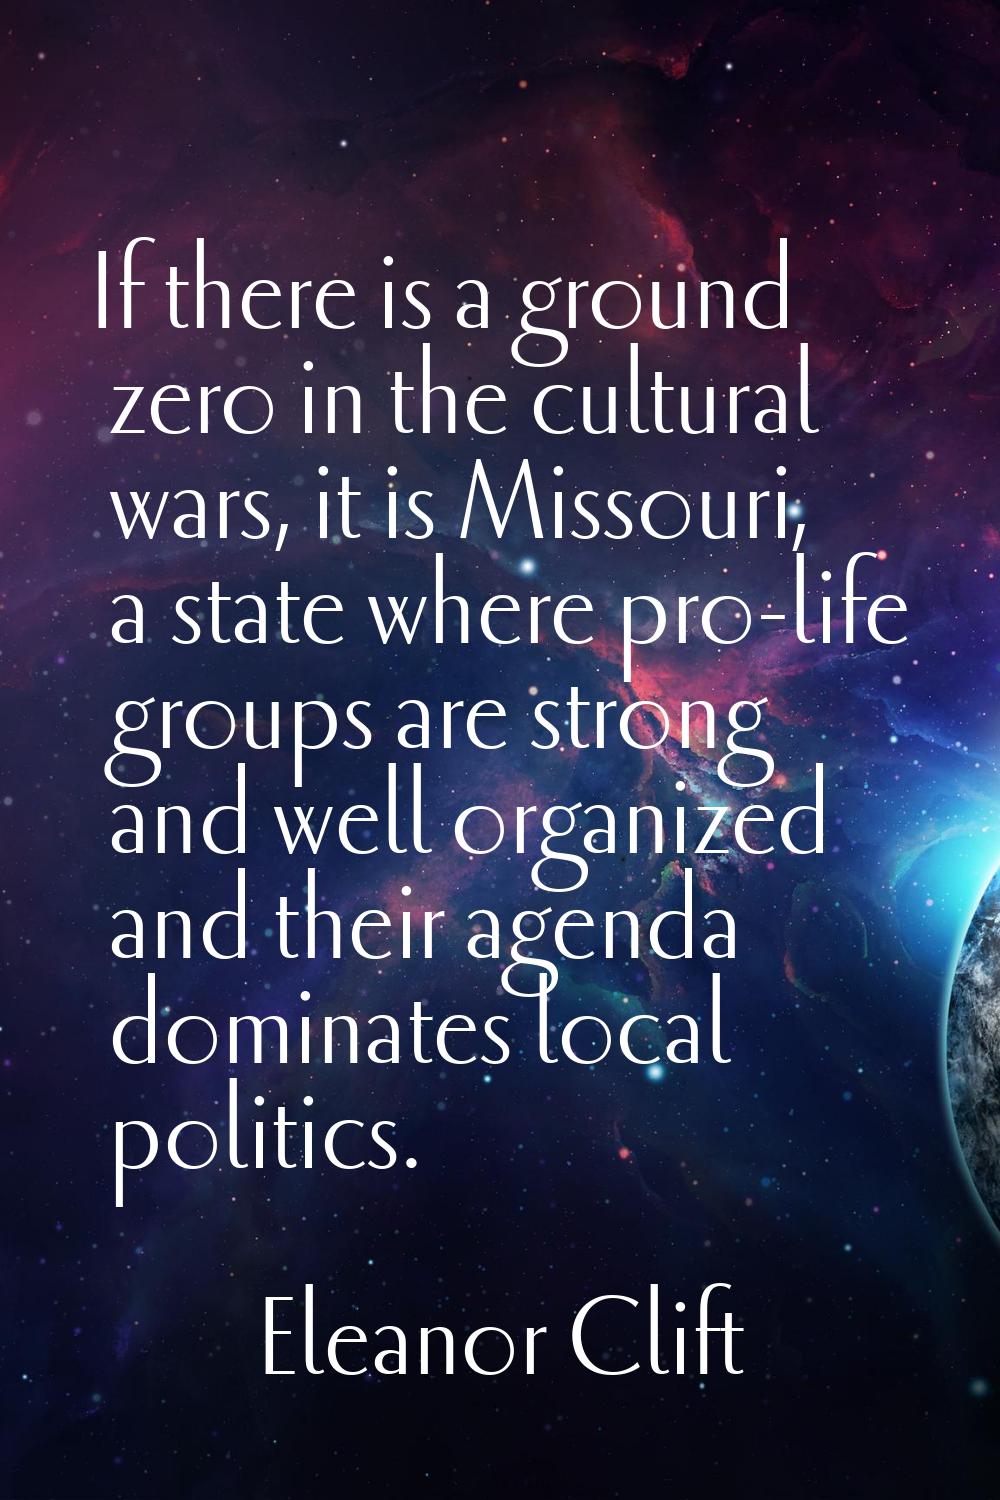 If there is a ground zero in the cultural wars, it is Missouri, a state where pro-life groups are s